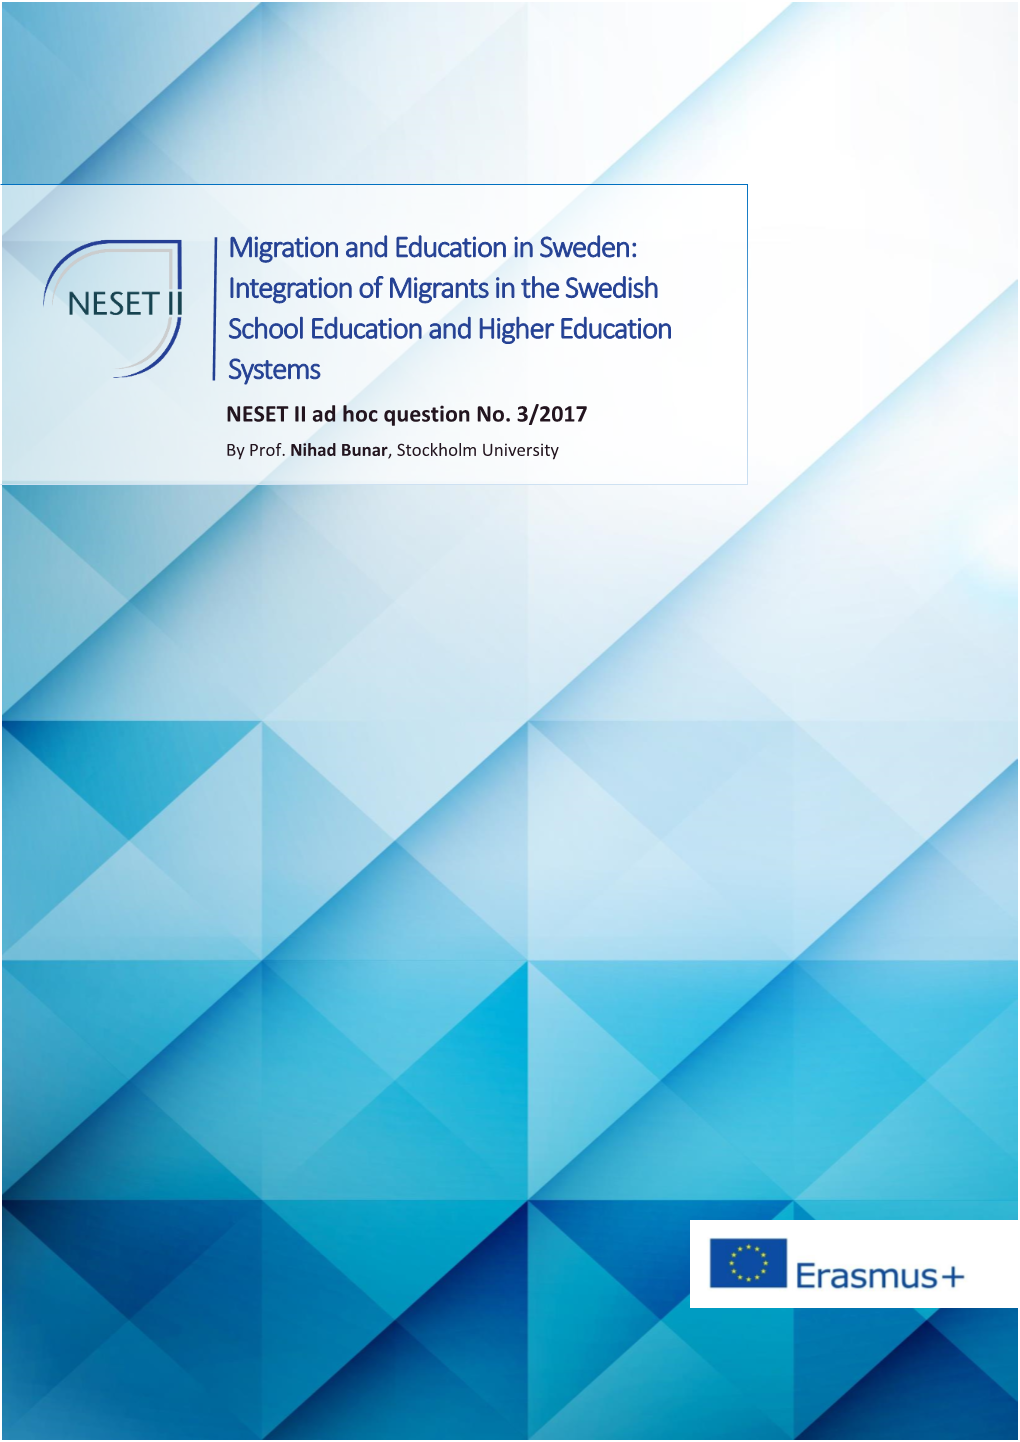 Integration of Migrants in the Swedish School Education and Higher Education Systems NESET II Ad Hoc Question No